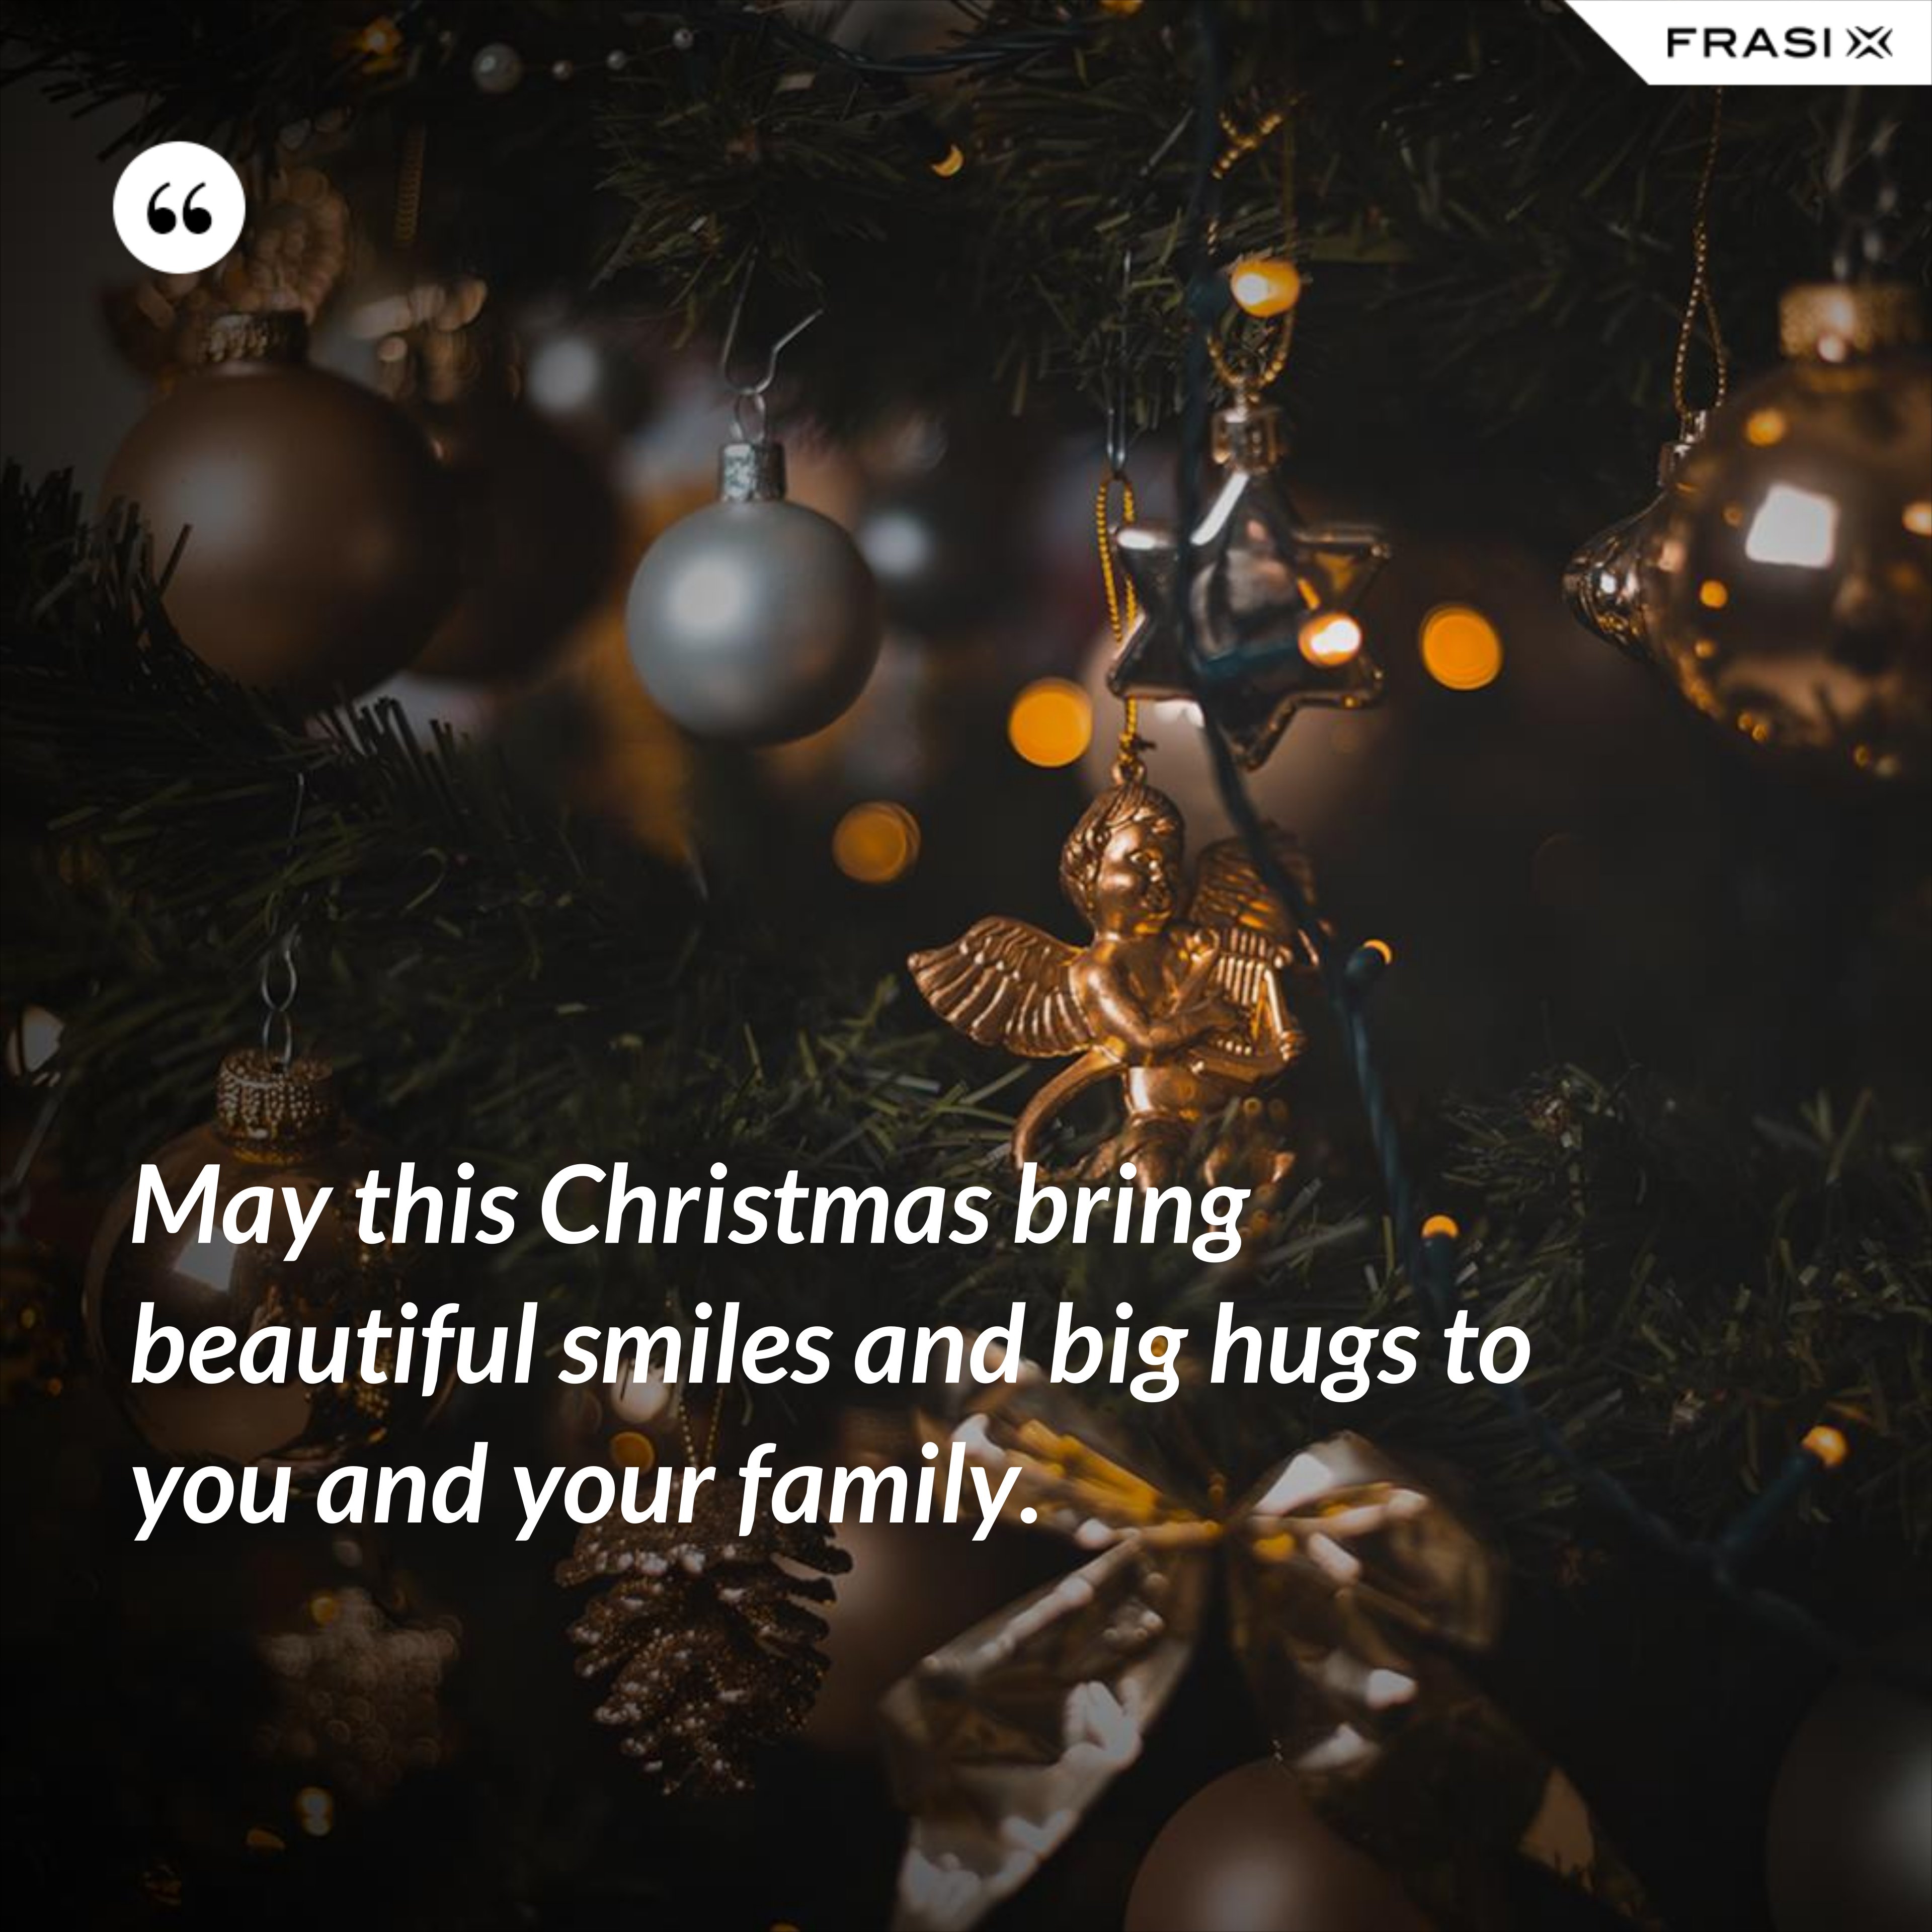 May this Christmas bring beautiful smiles and big hugs to you and your family. - Anonimo